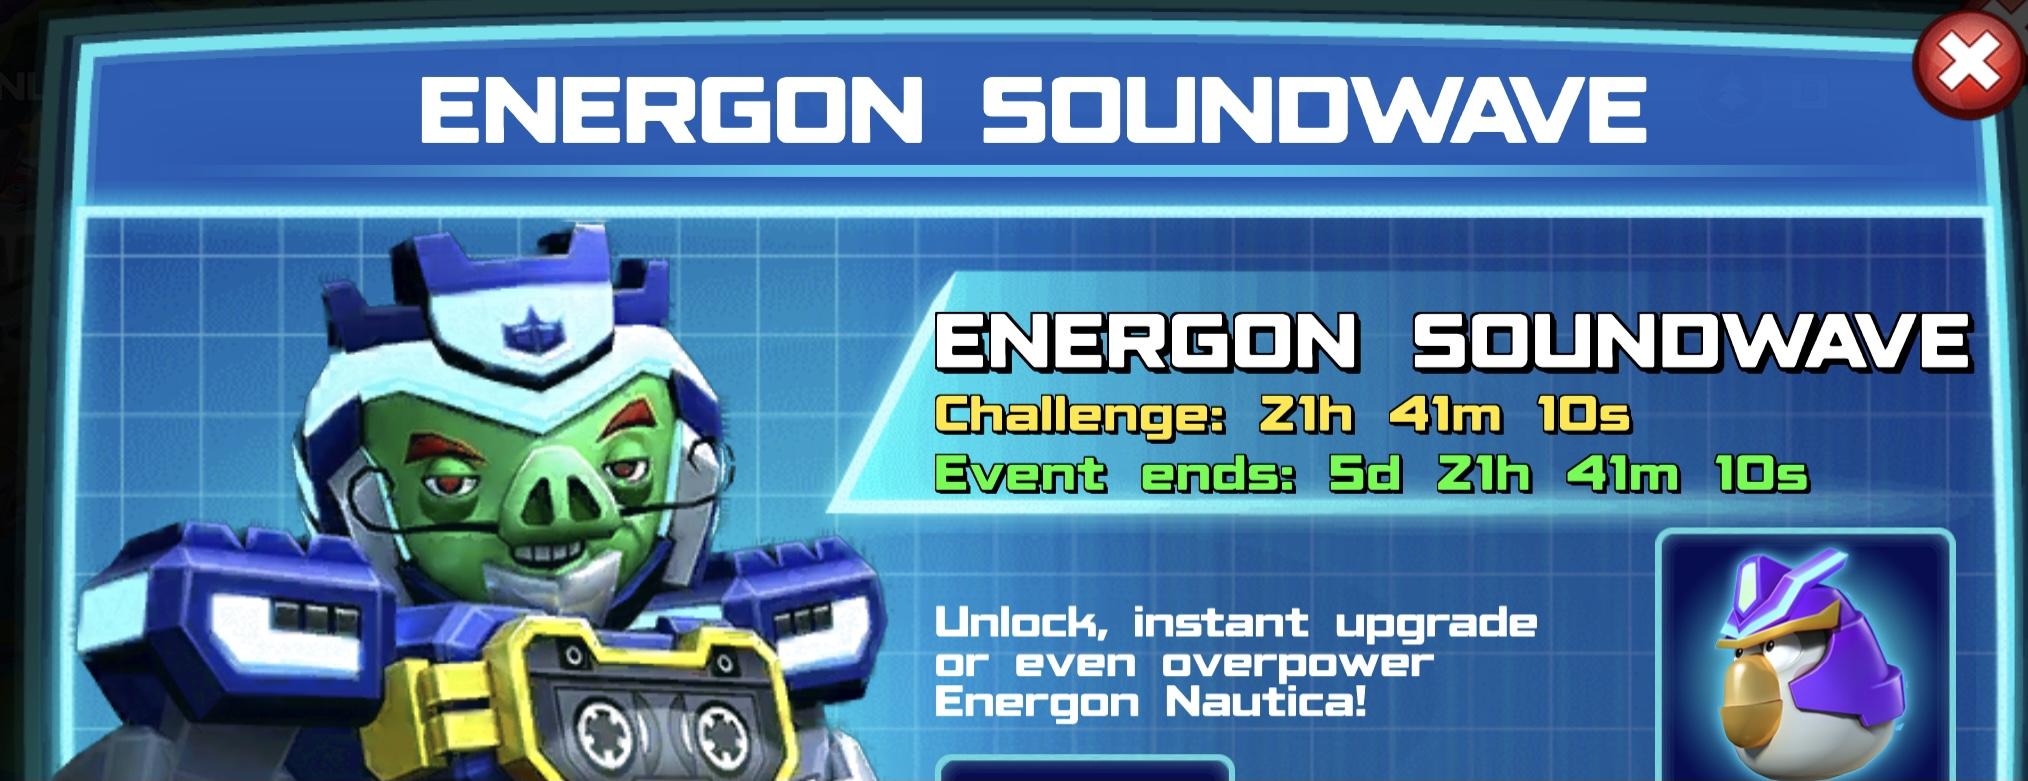 The event banner for Energon Soundwave